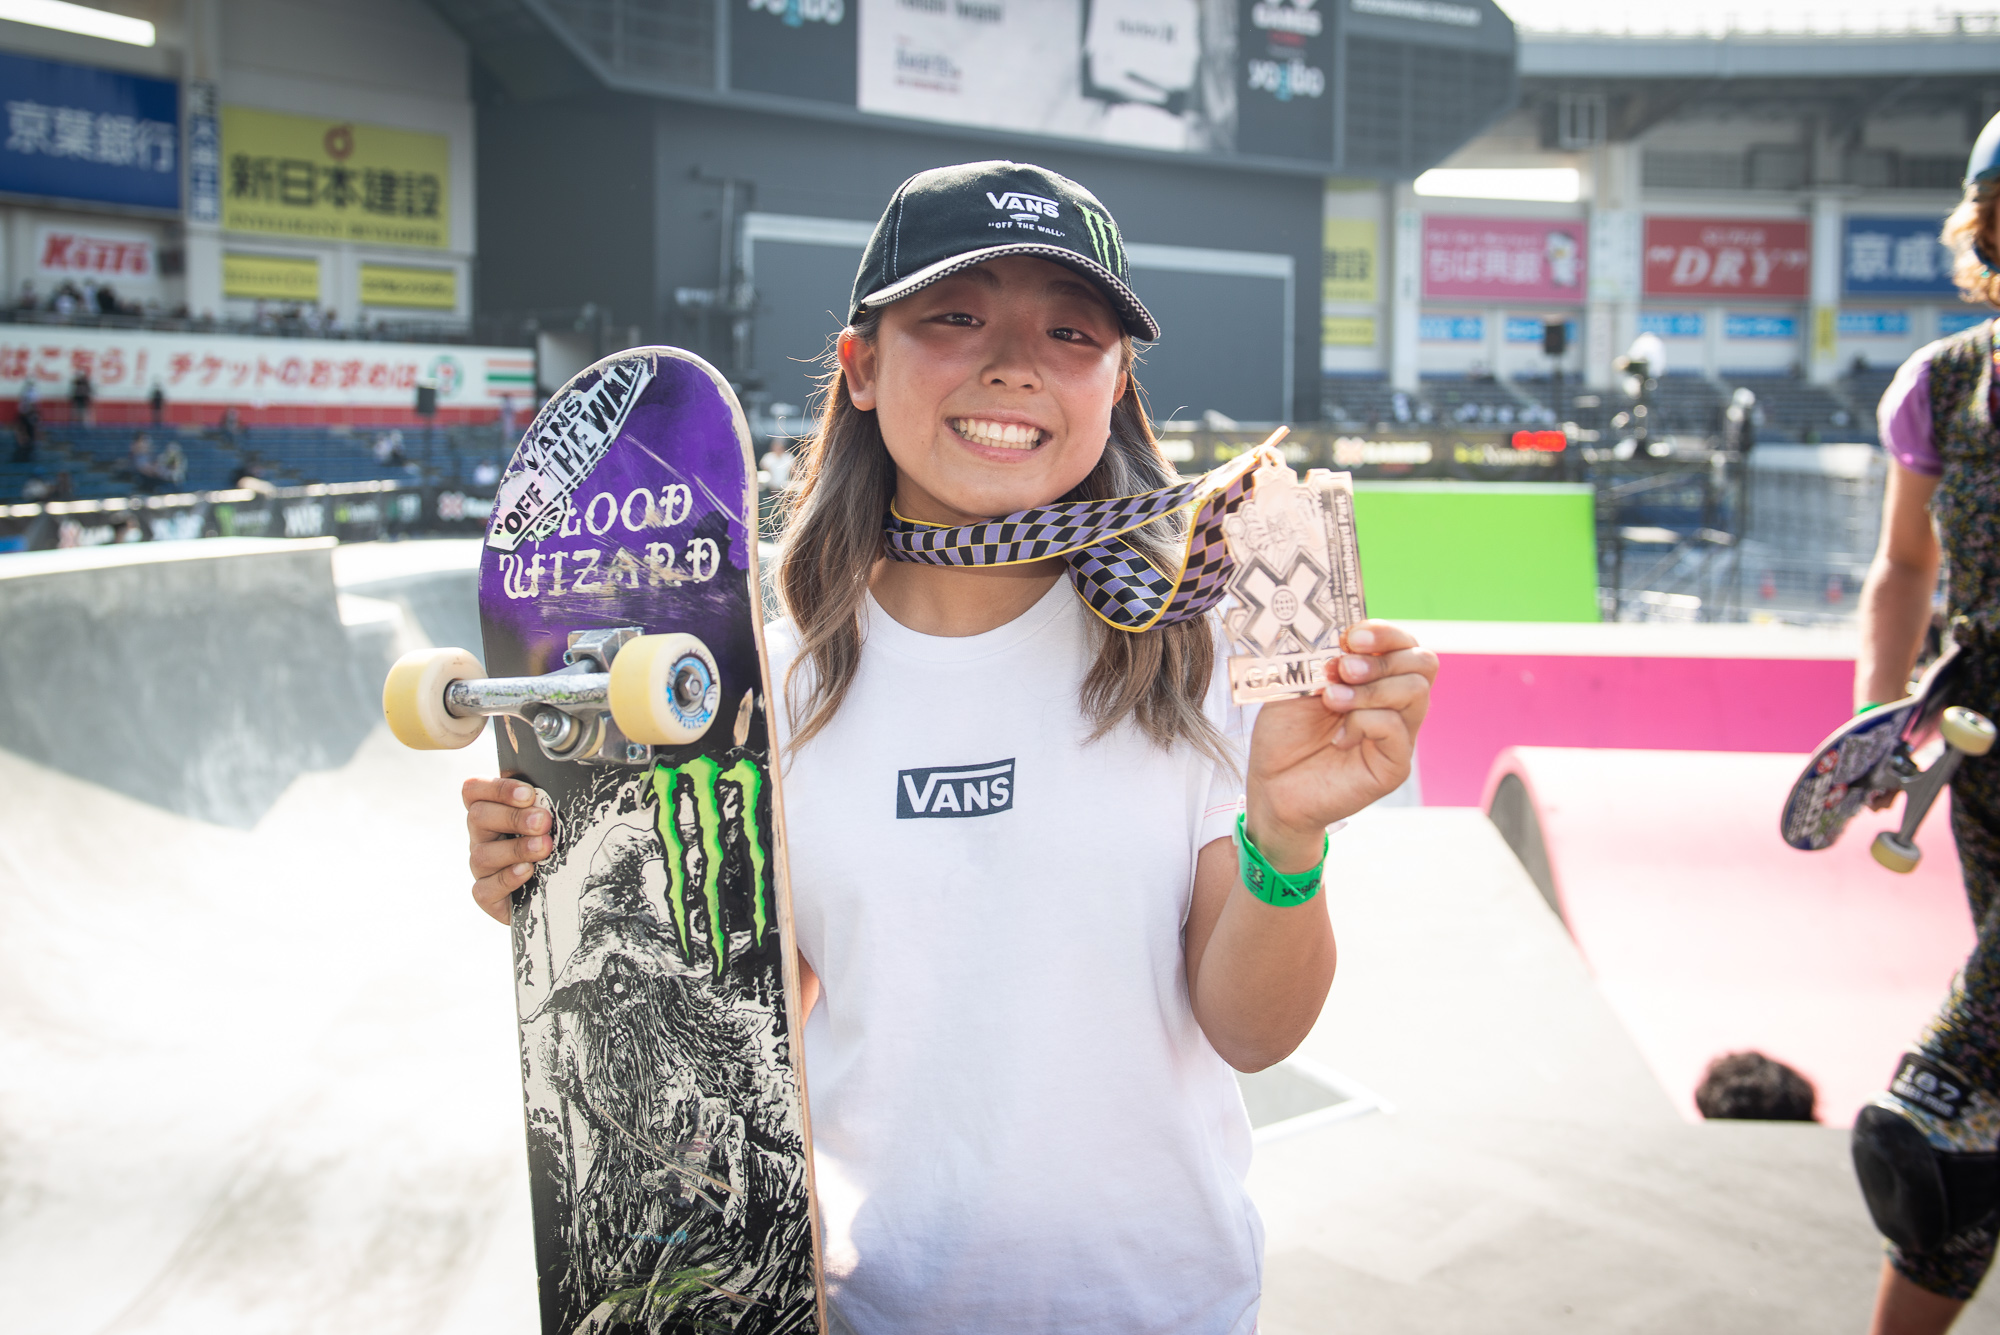 Monster Energy's Mami Tezuka Will Compete in Women's Skateboard Park at X Games Chiba 2023